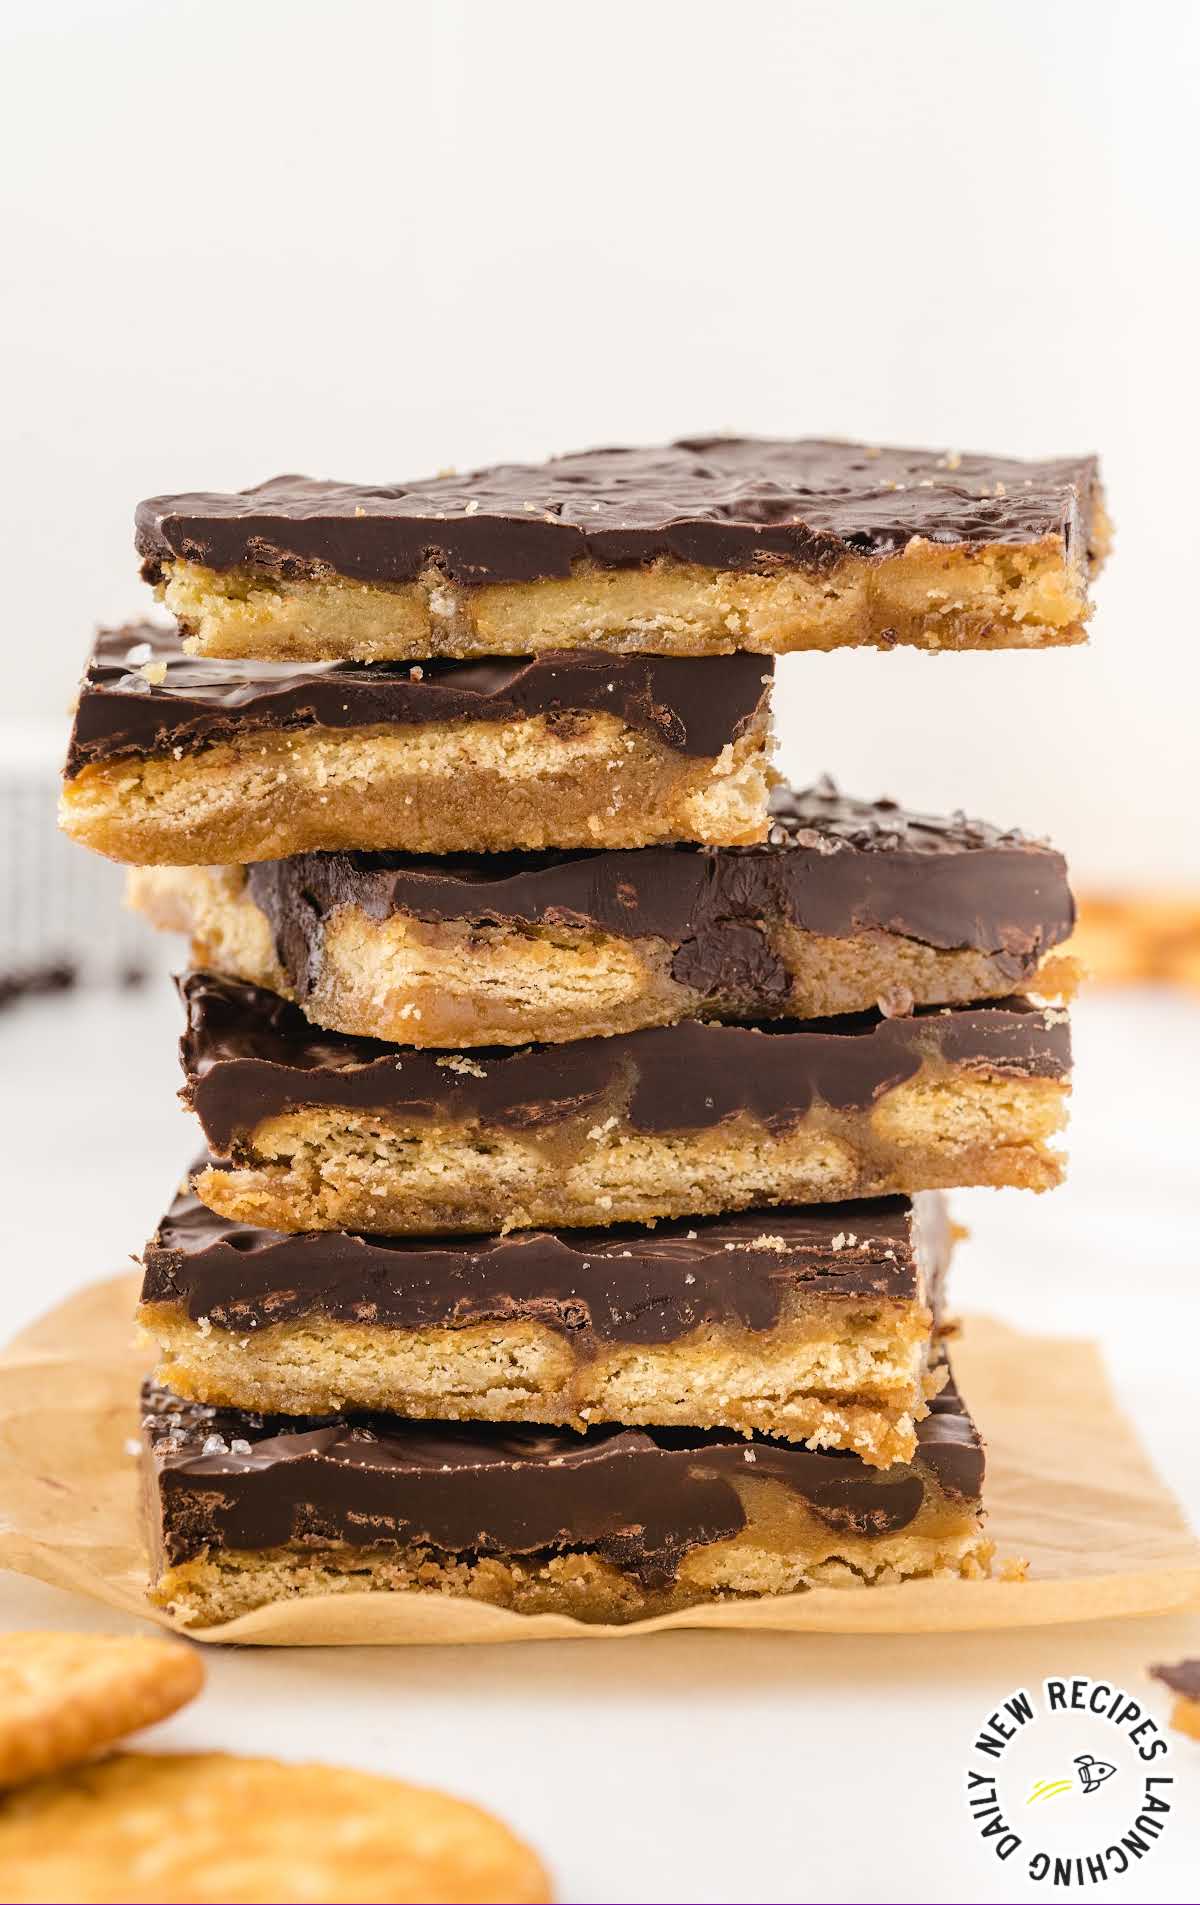 Ritz Cracker Toffee stacked on top of each other